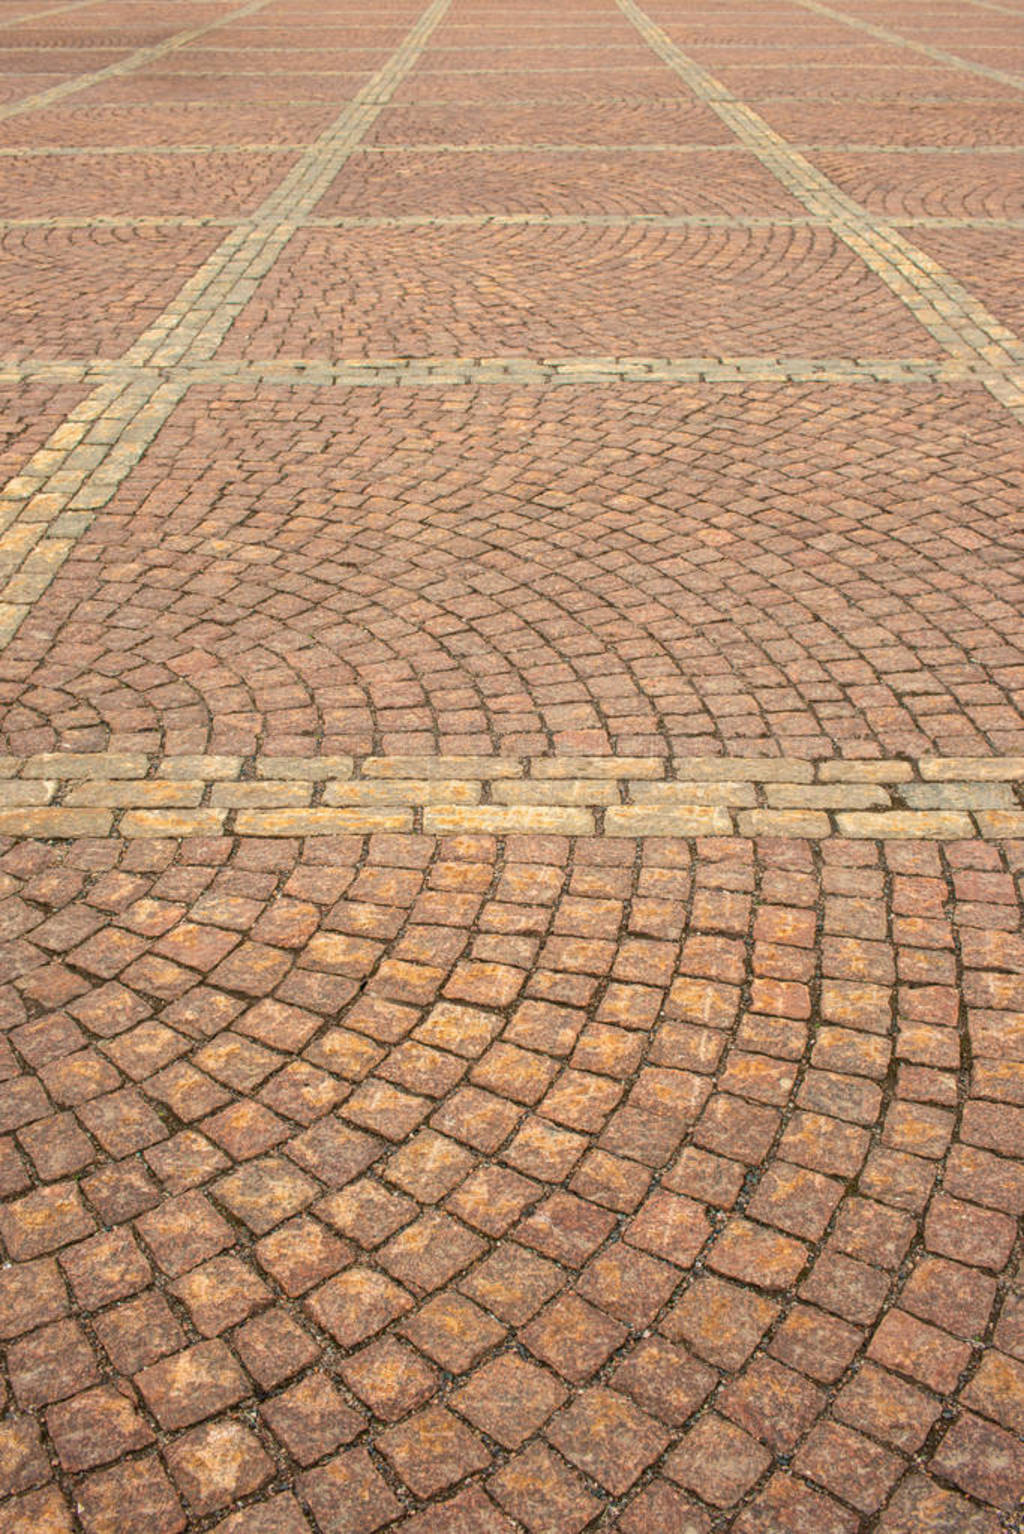 A fragment of the sidewalk, lined with colored granite stone in